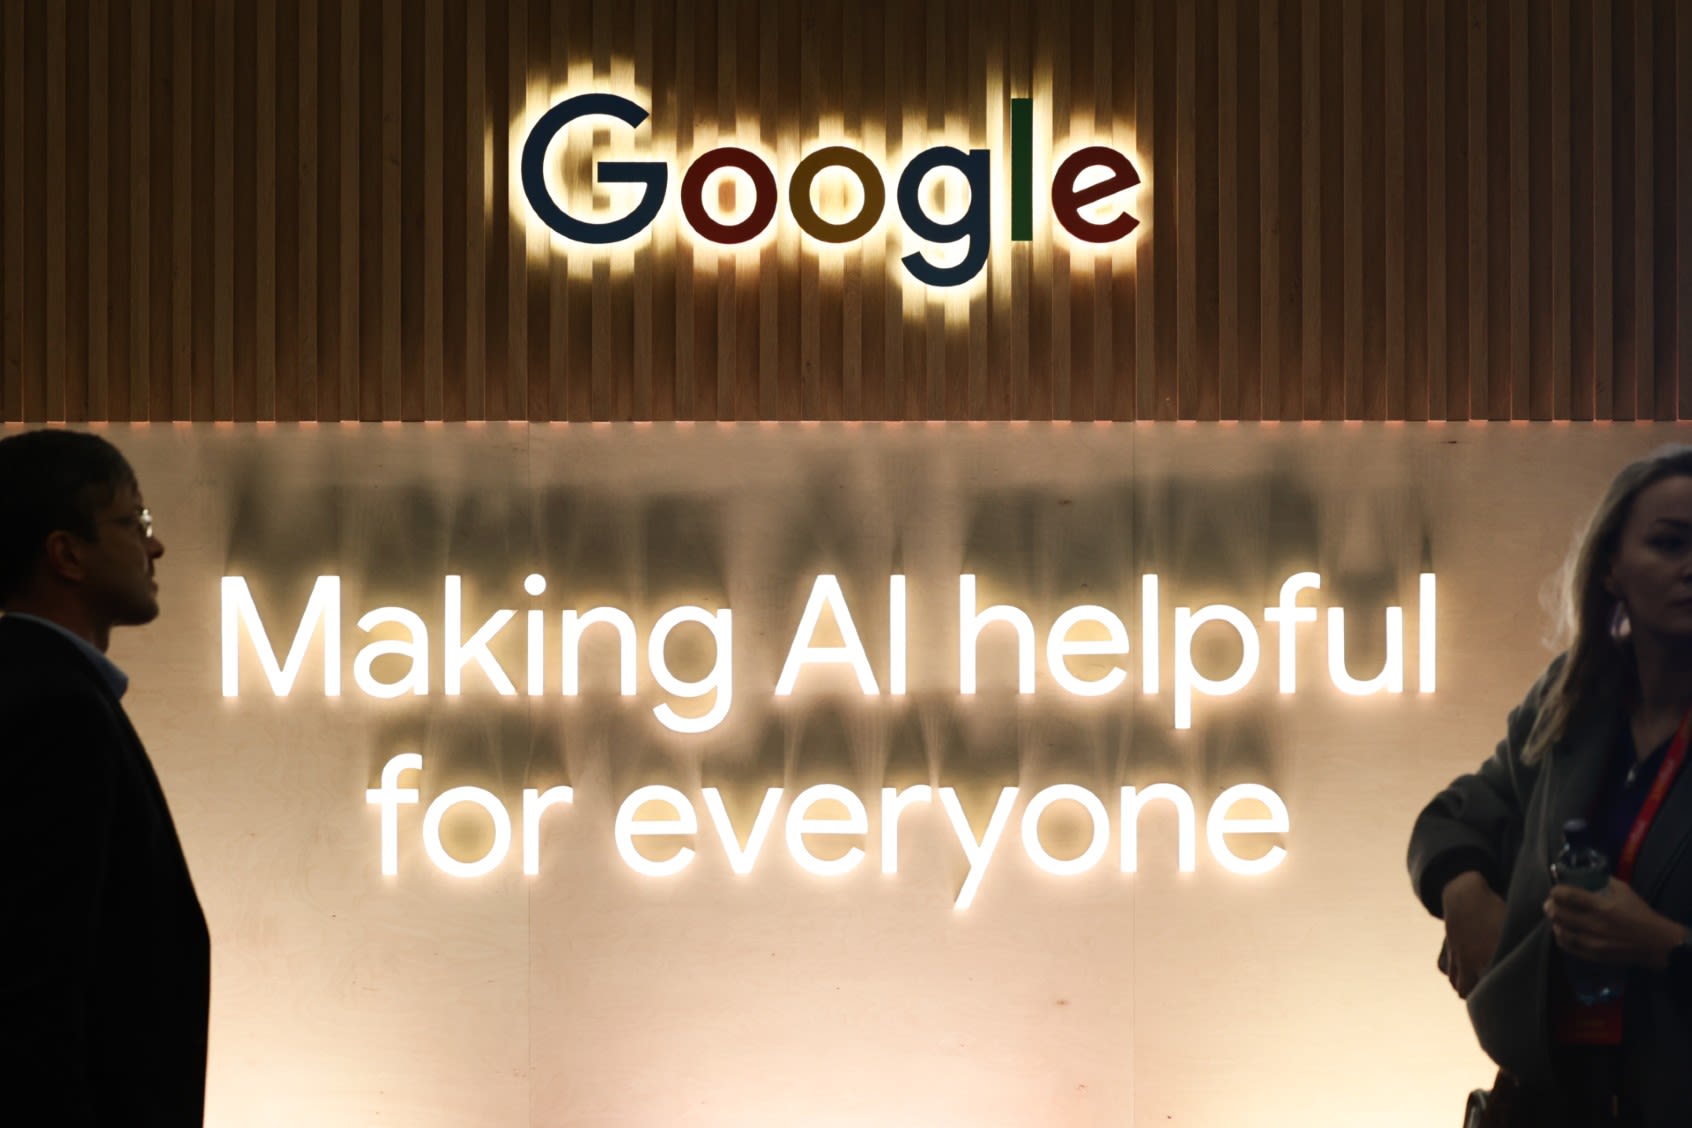 Google's AI Overview seems to be spewing inaccurate, dangerous answers